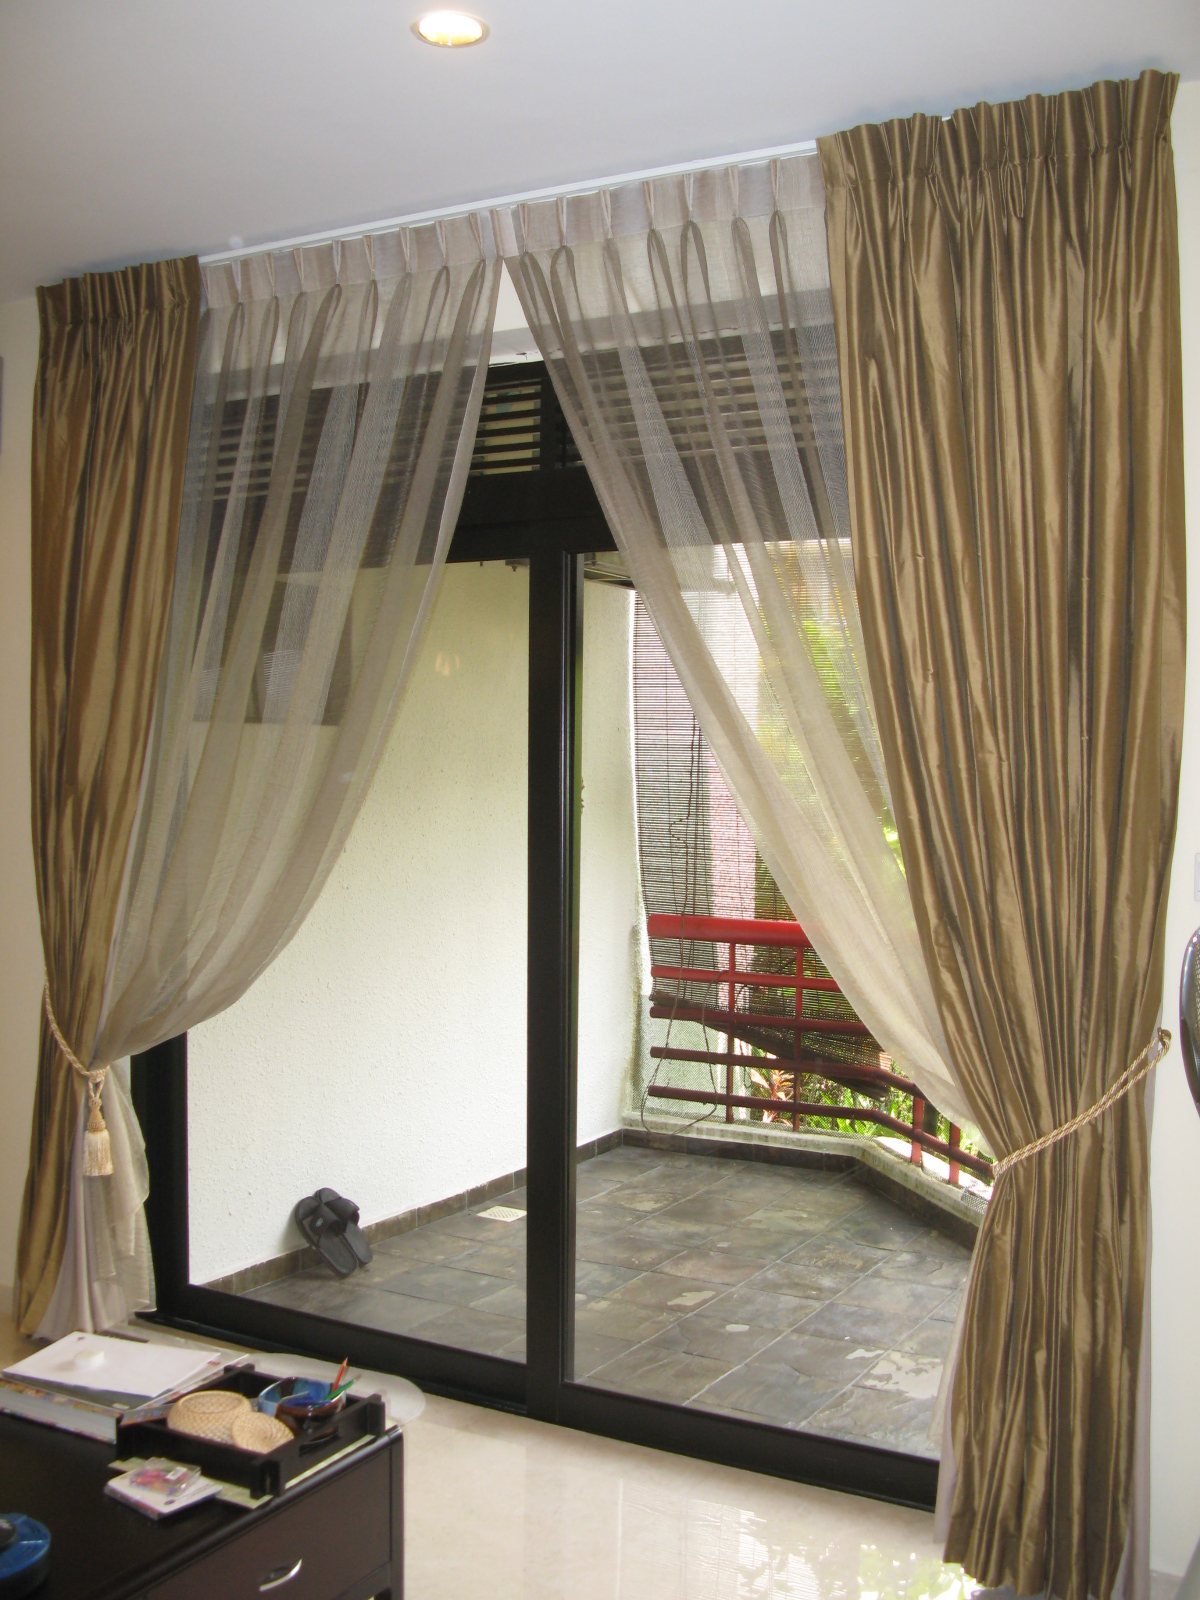 Choosing Curtains for Sliding Glass Doors - Style and Functionality